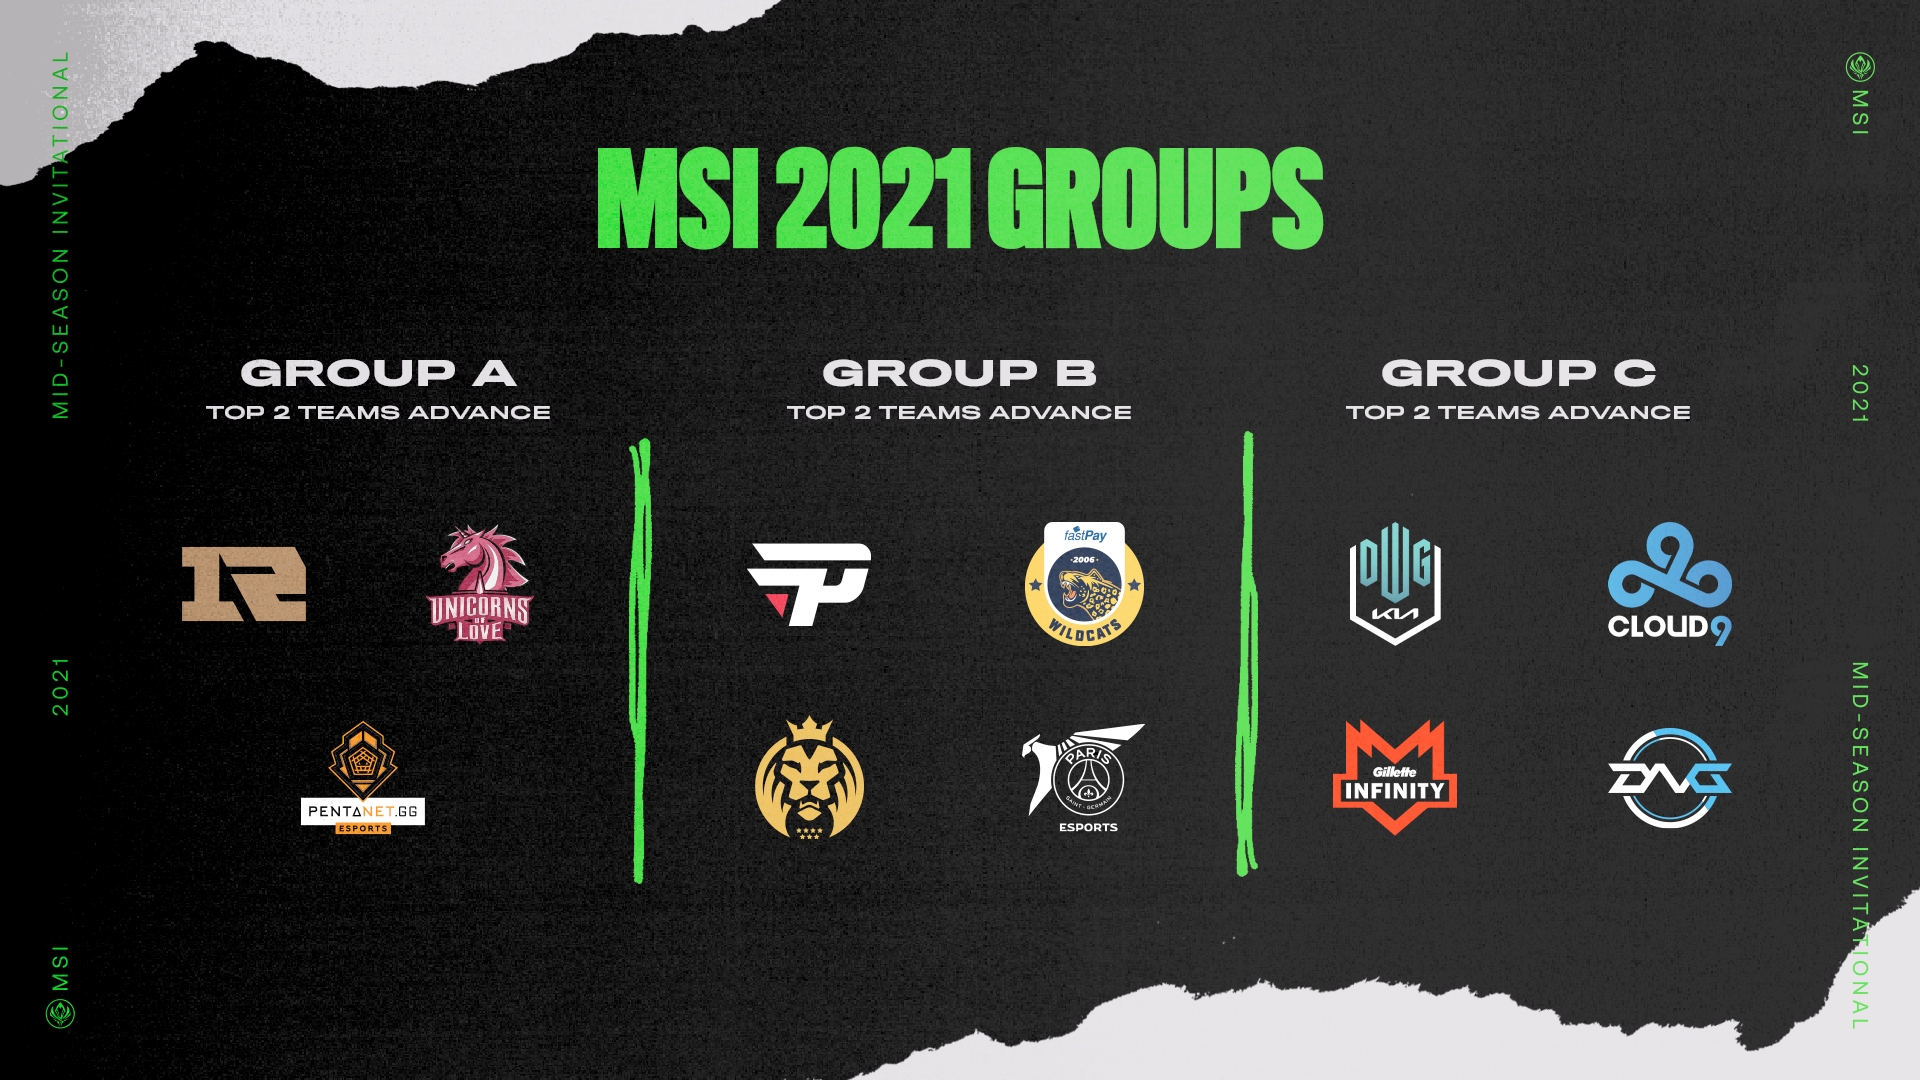 2021 schedule msi How to